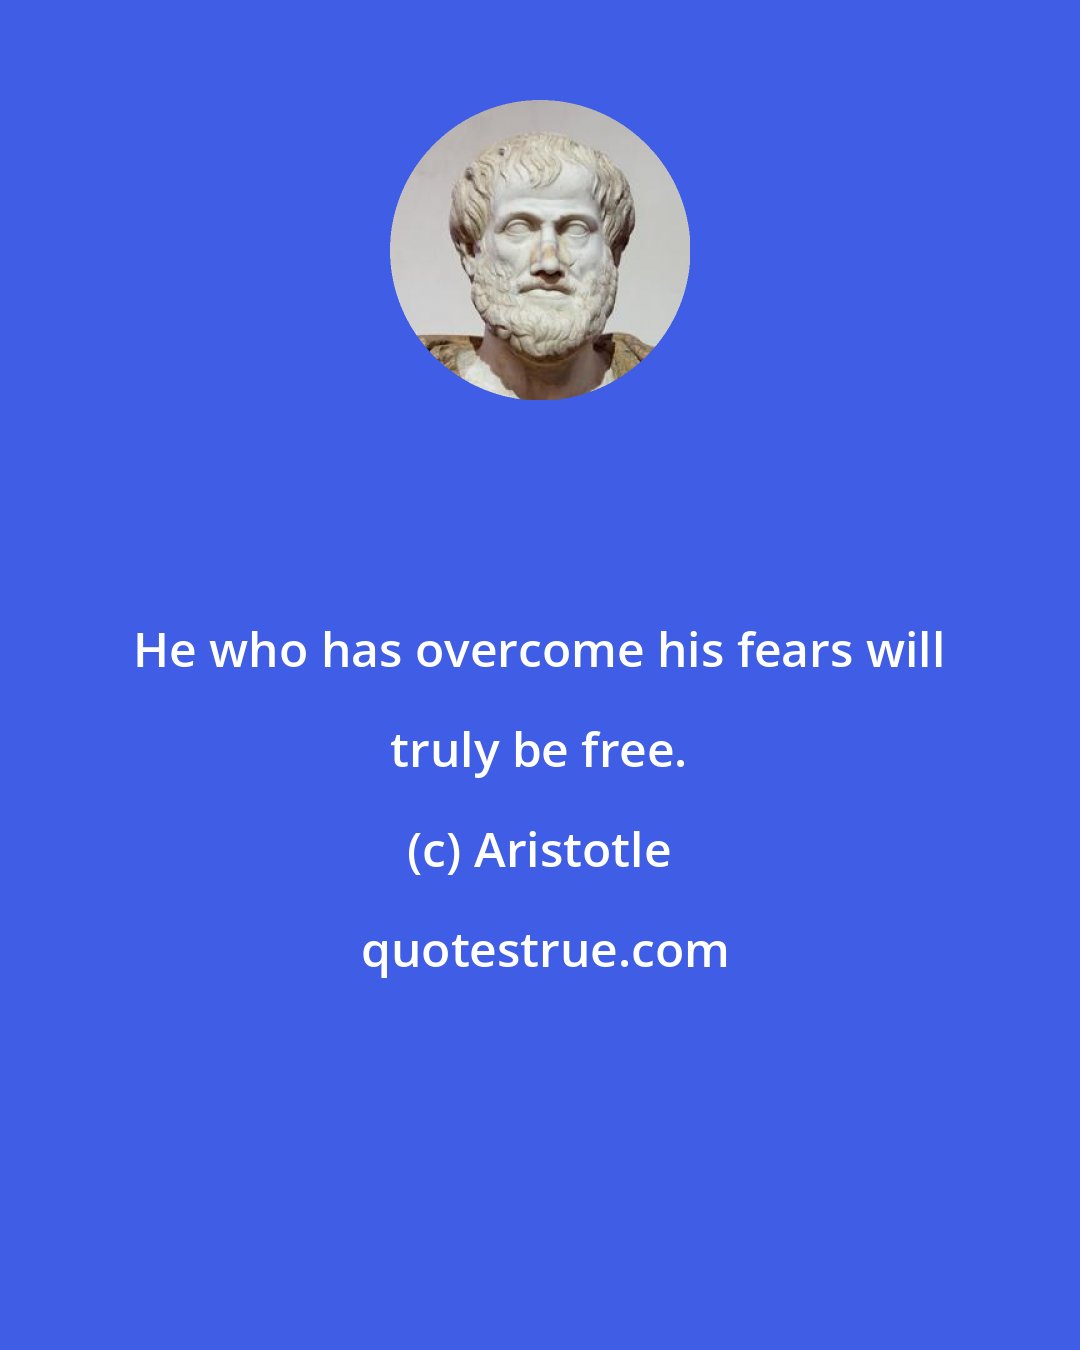 Aristotle: He who has overcome his fears will truly be free.